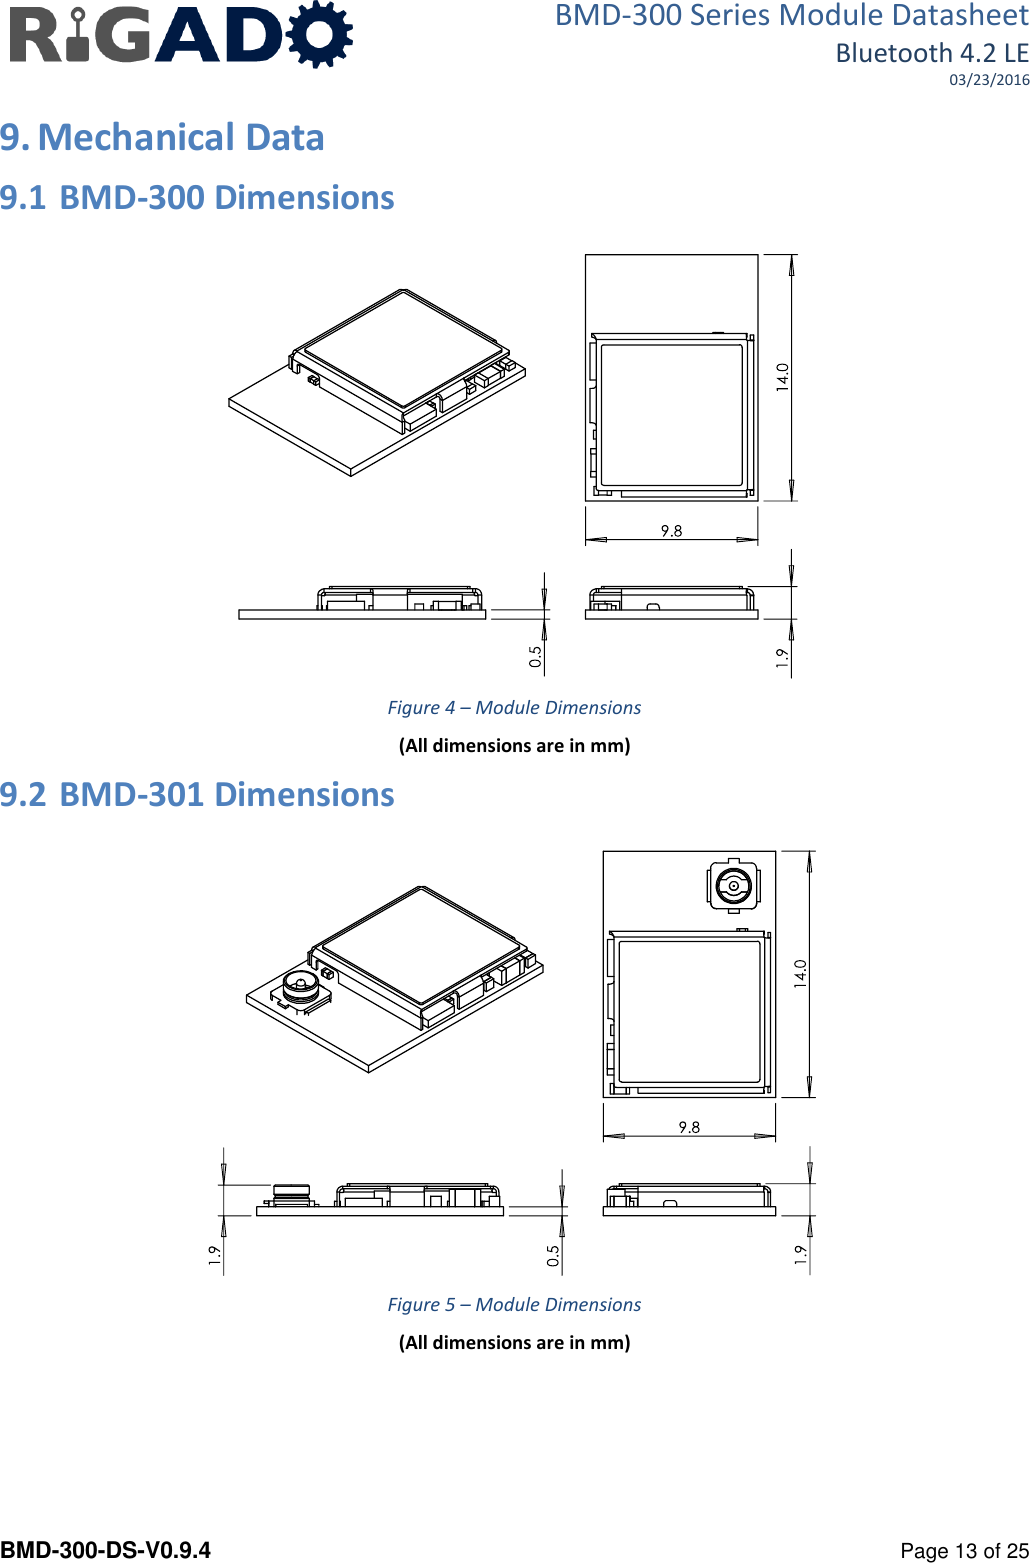 BMD-300 Series Module Datasheet Bluetooth 4.2 LE 03/23/2016  BMD-300-DS-V0.9.4      Page 13 of 25 9. Mechanical Data  9.1 BMD-300 Dimensions    Figure 4 – Module Dimensions (All dimensions are in mm) 9.2 BMD-301 Dimensions    Figure 5 – Module Dimensions (All dimensions are in mm)   